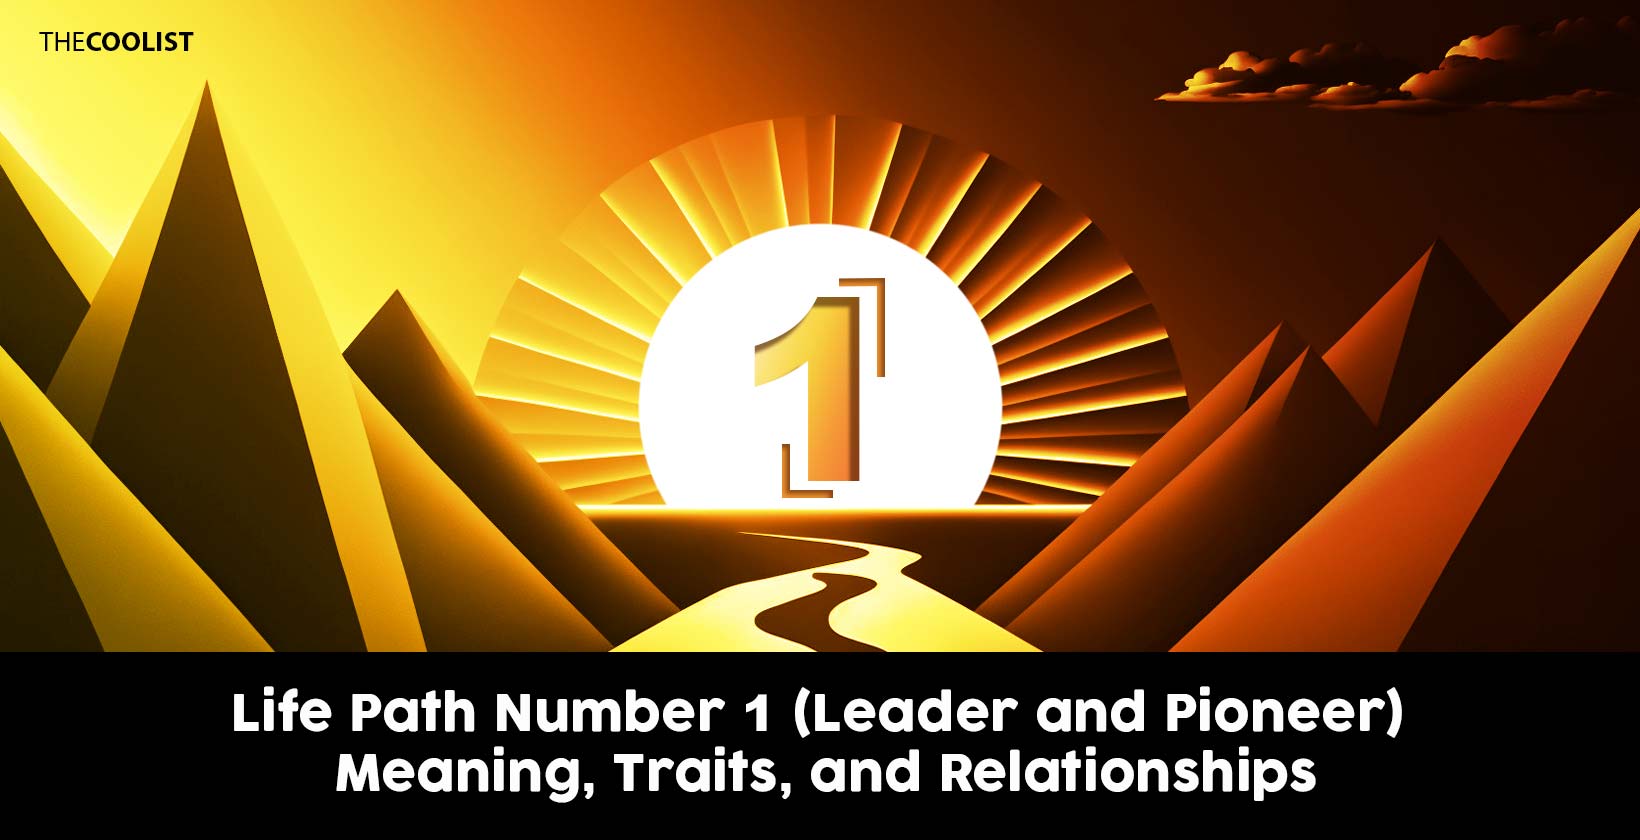 Life Path Number 1 (Leader and Pioneer) Meaning, Traits, and Relationships